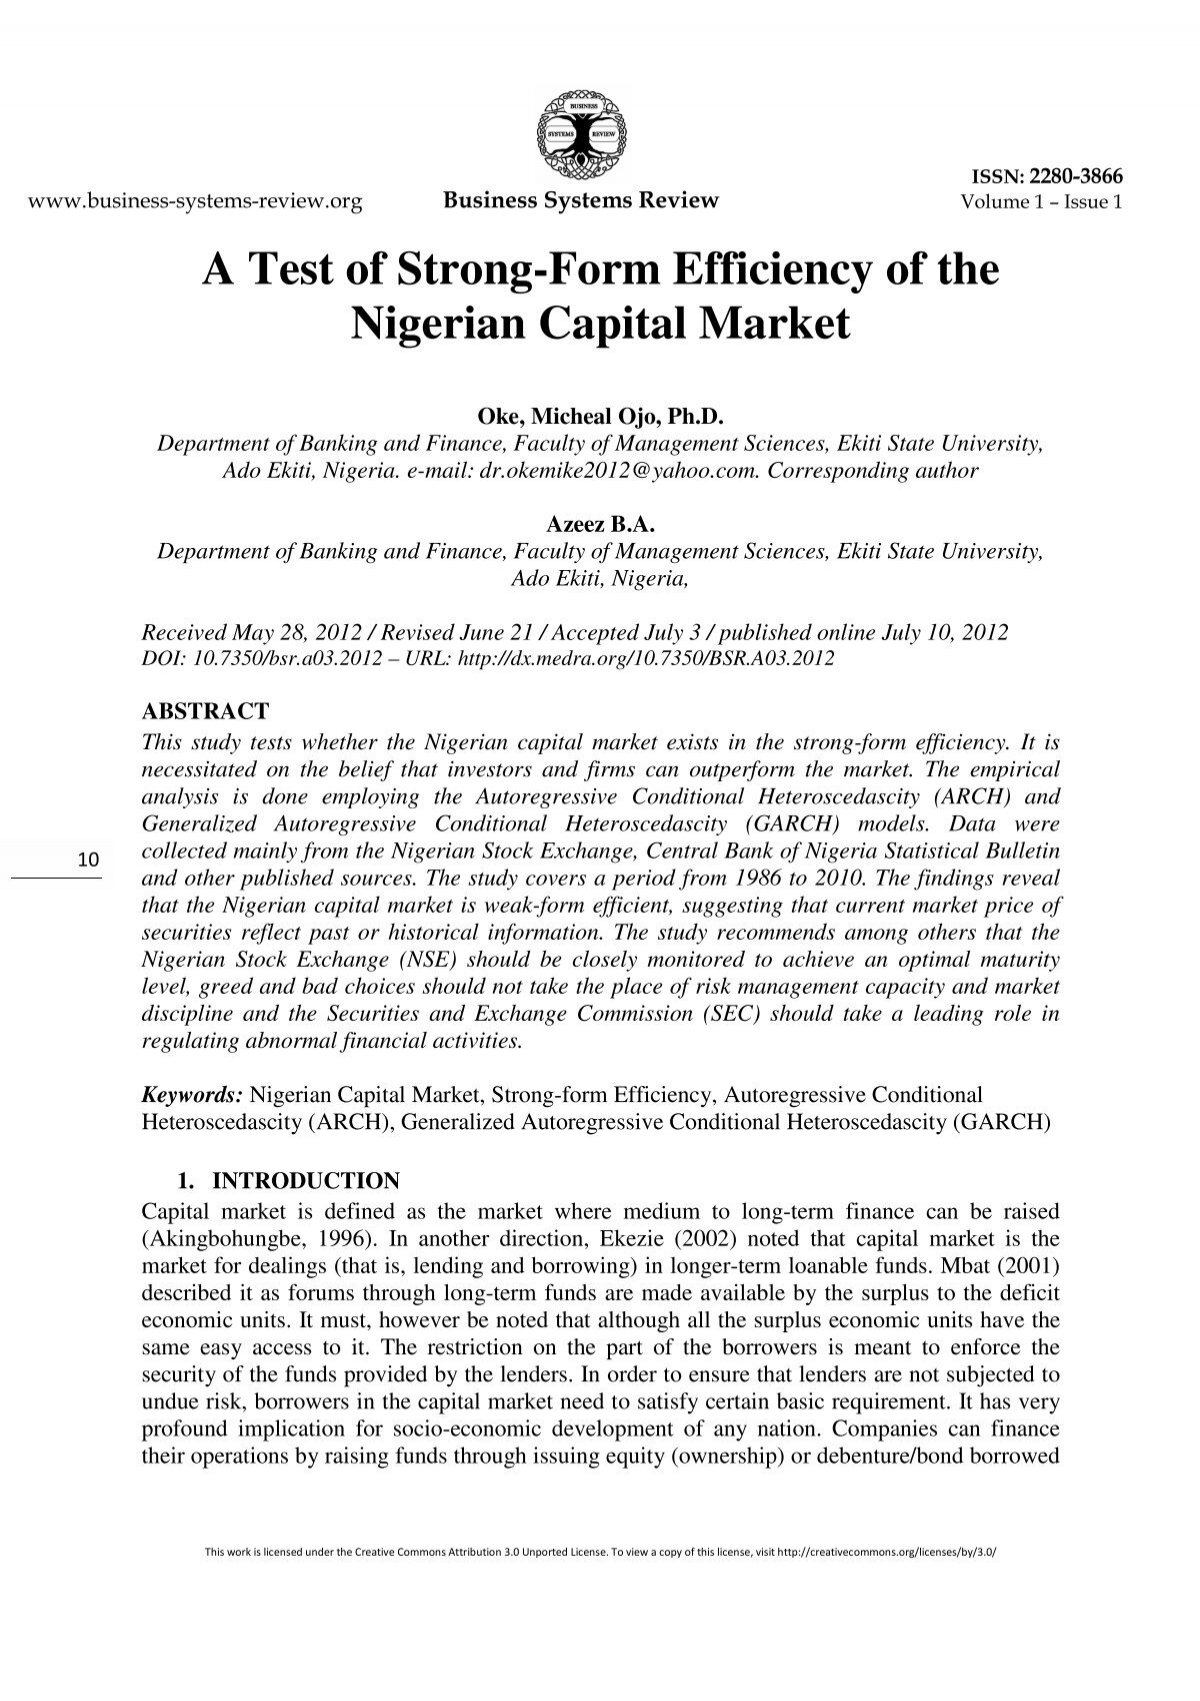 a-test-of-strong-form-efficiency-of-the-nigerian-capital-market